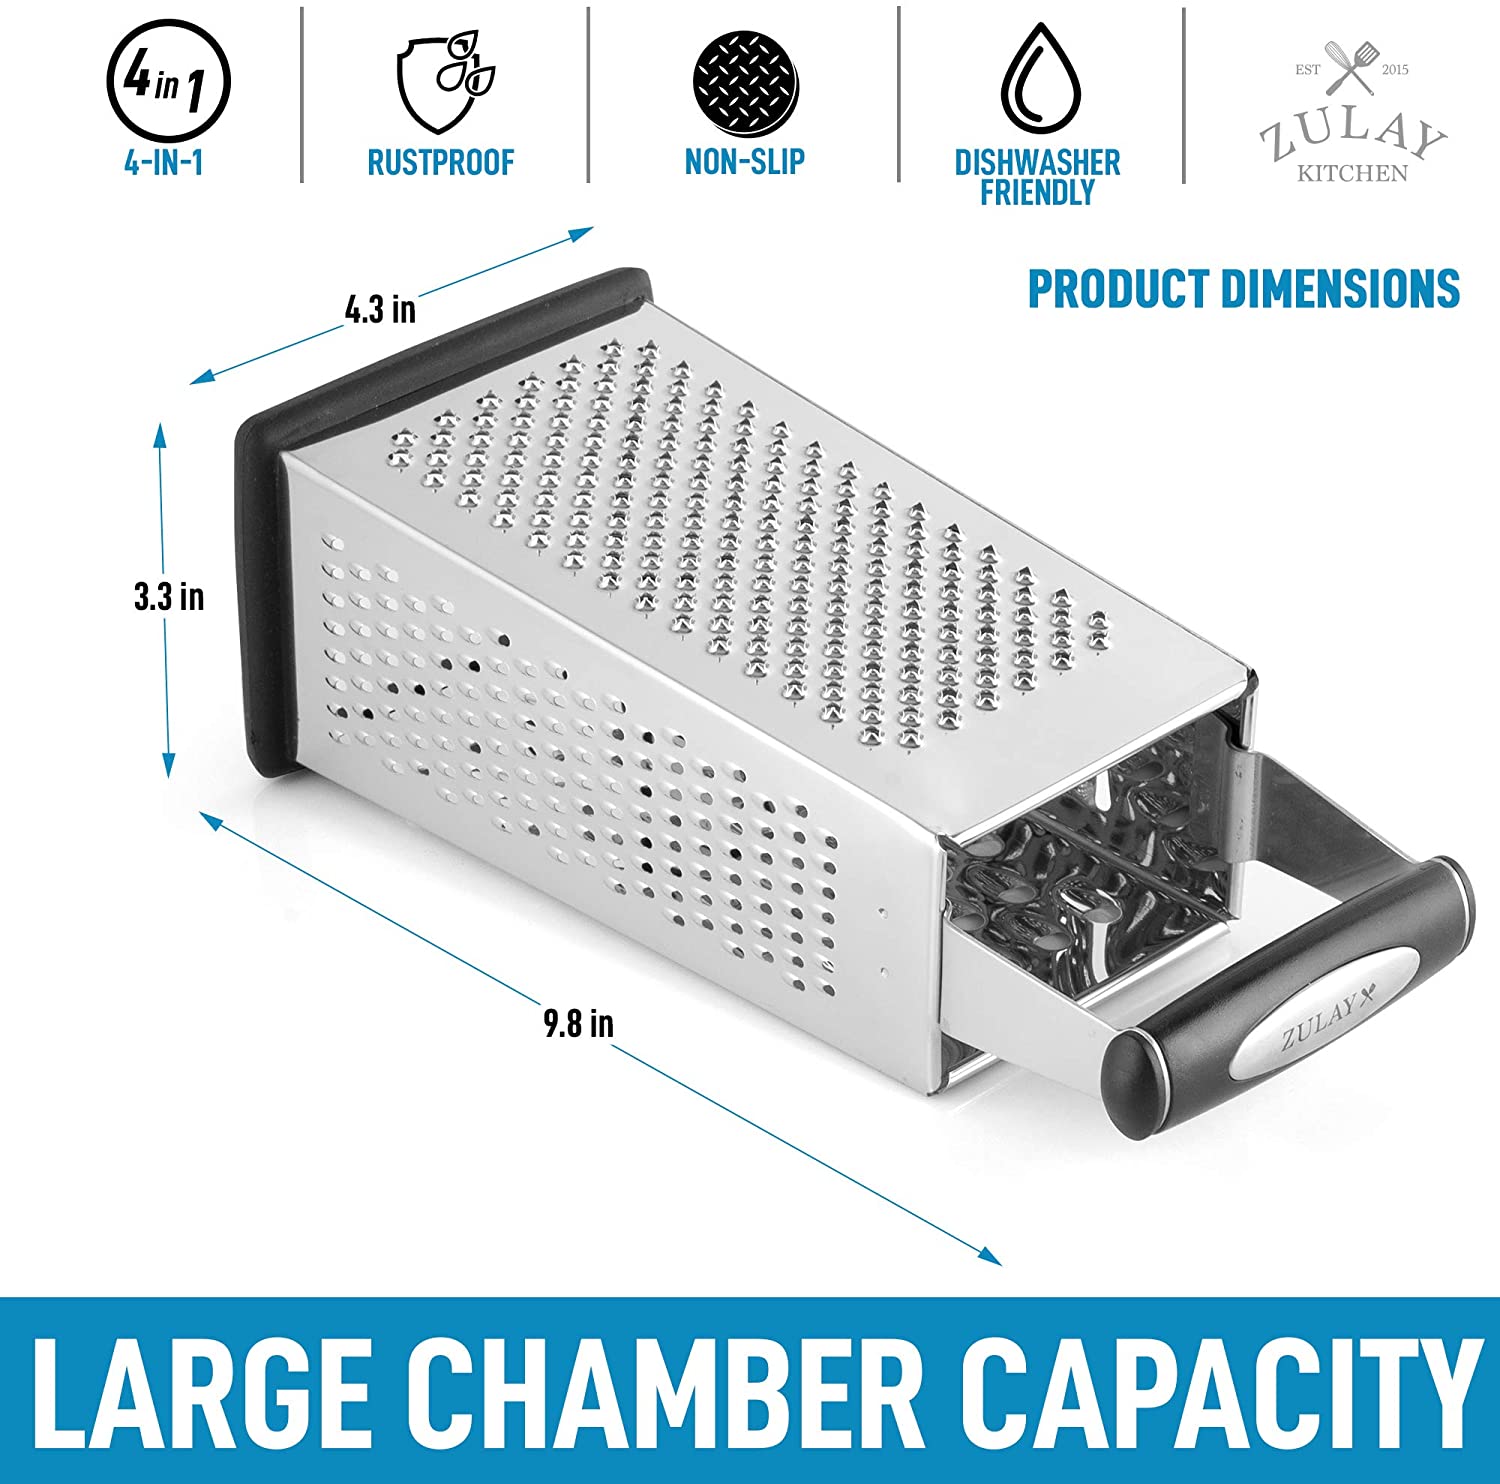 Stainless Steel Cheese Grater - 3 Sided – Jean Patrique